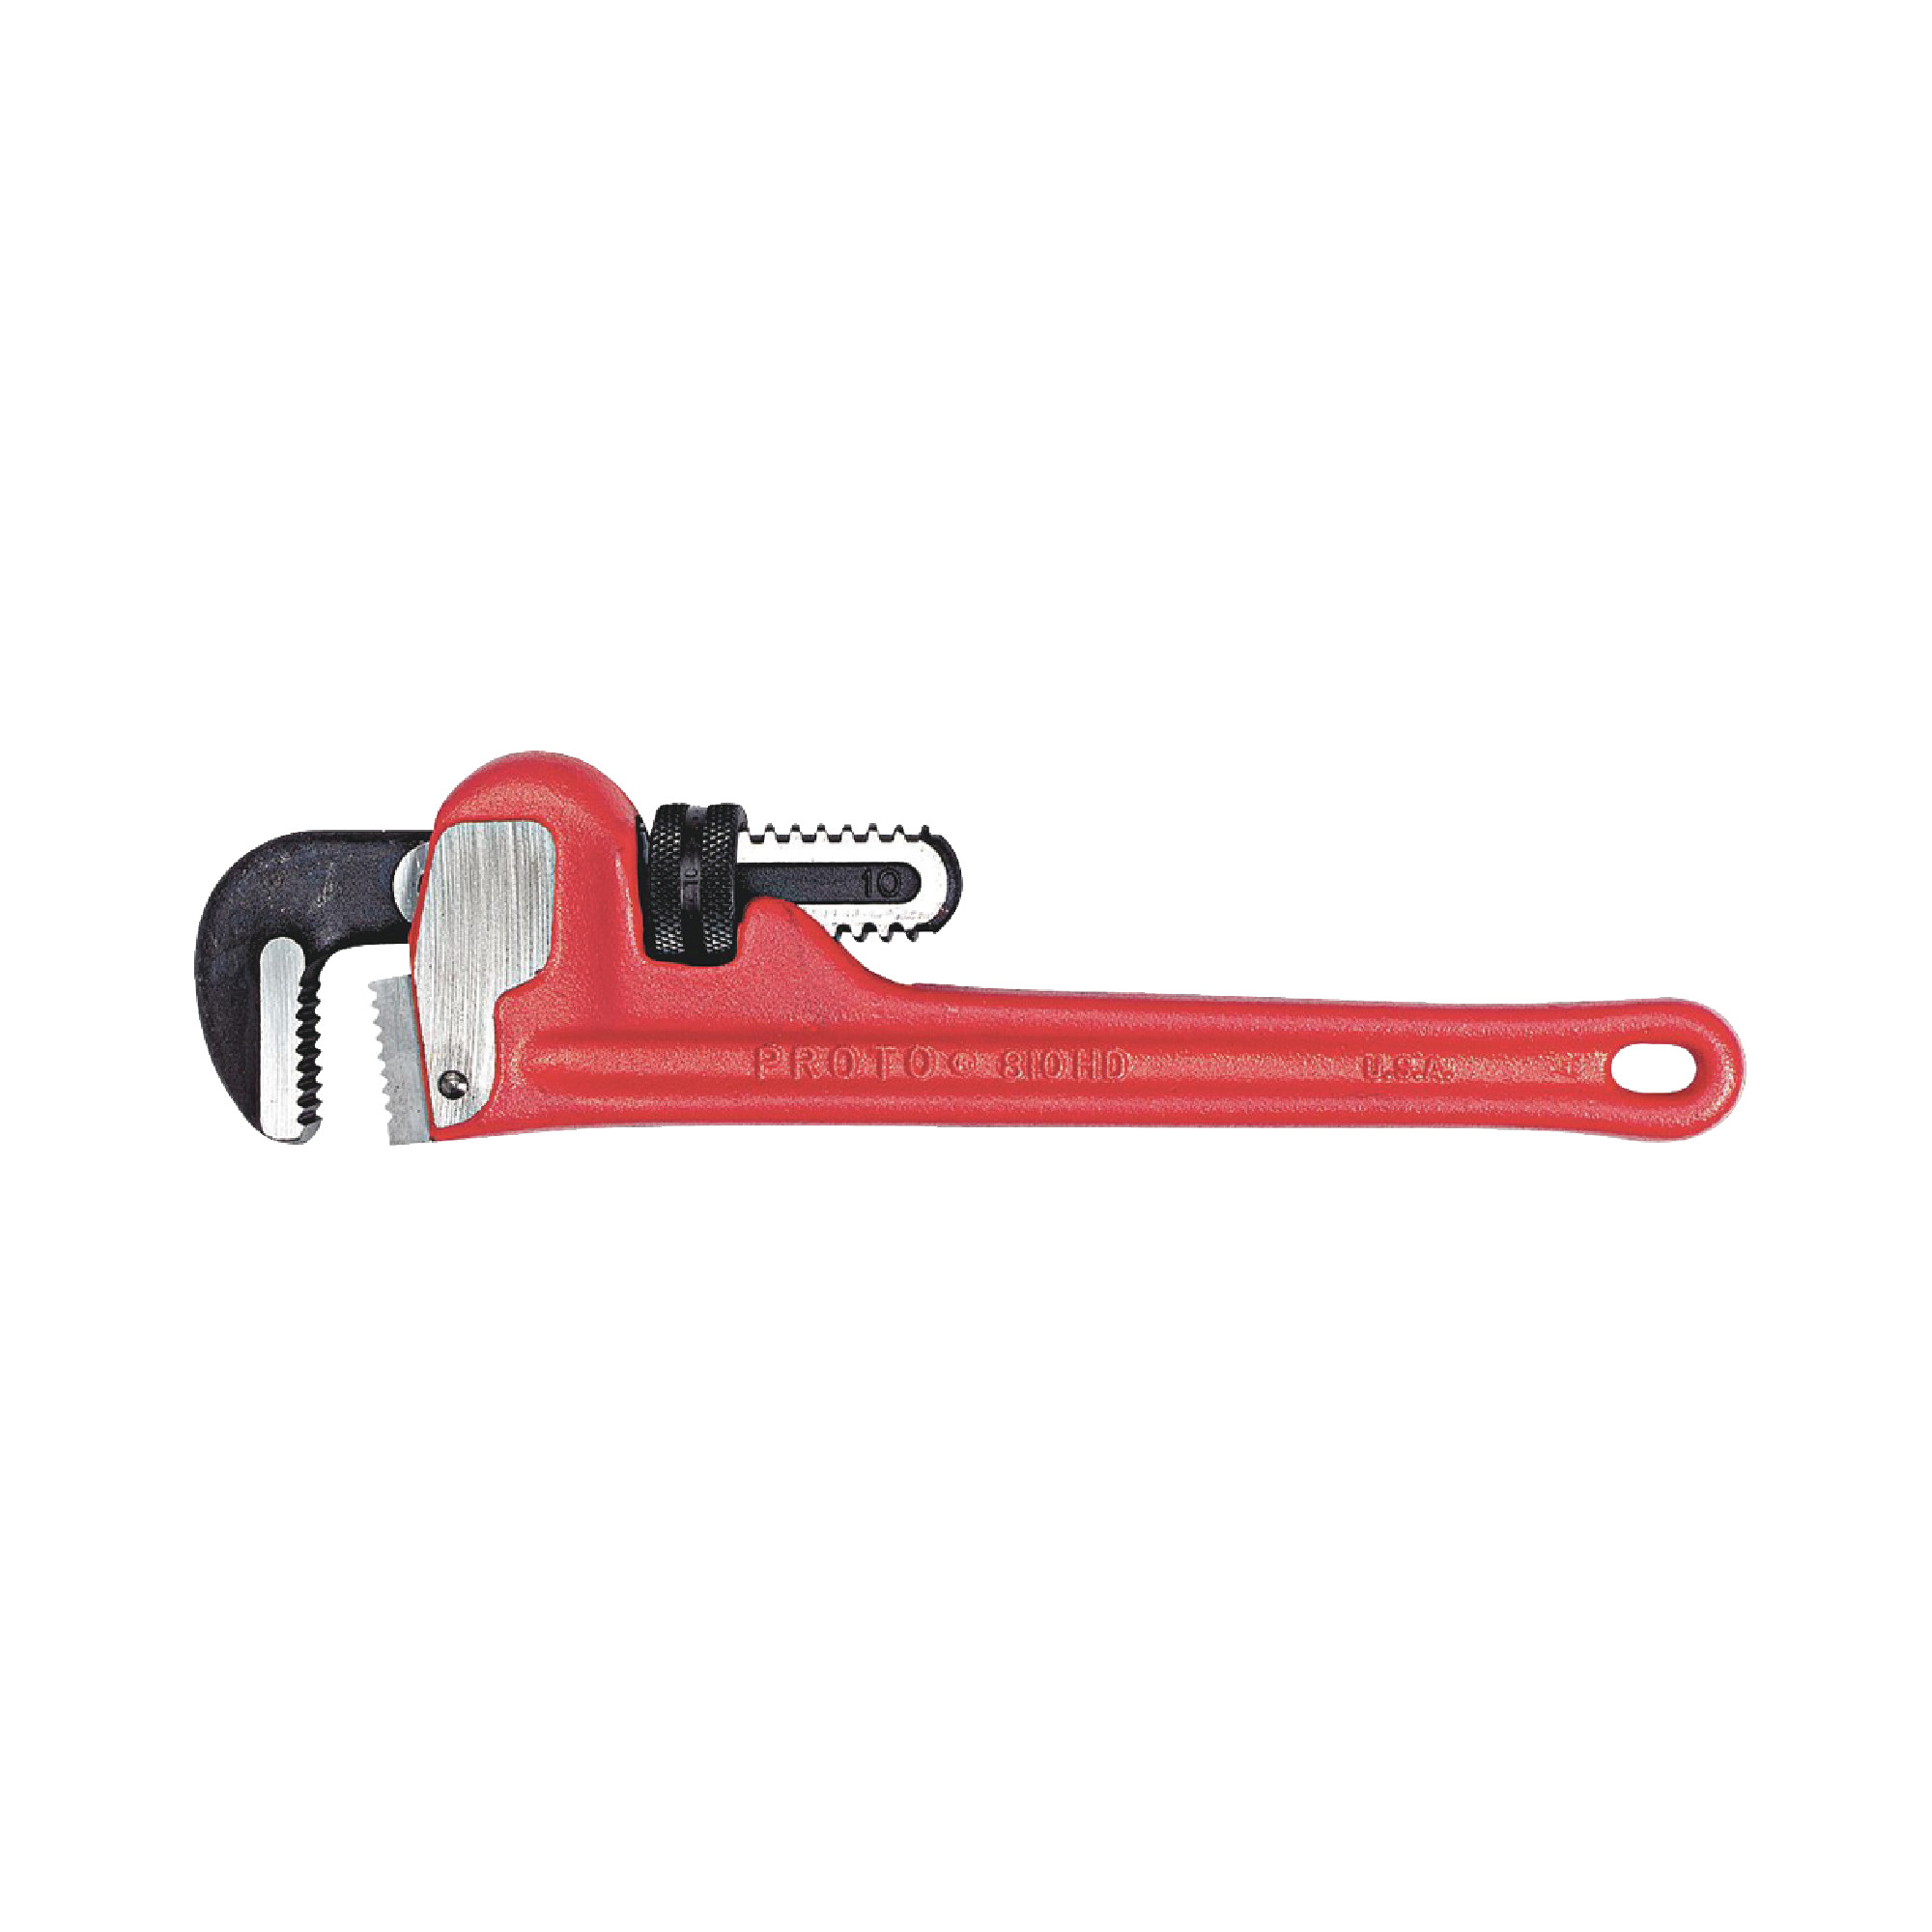 6" Cast Iron Pipe Wrench - Model: J806HD